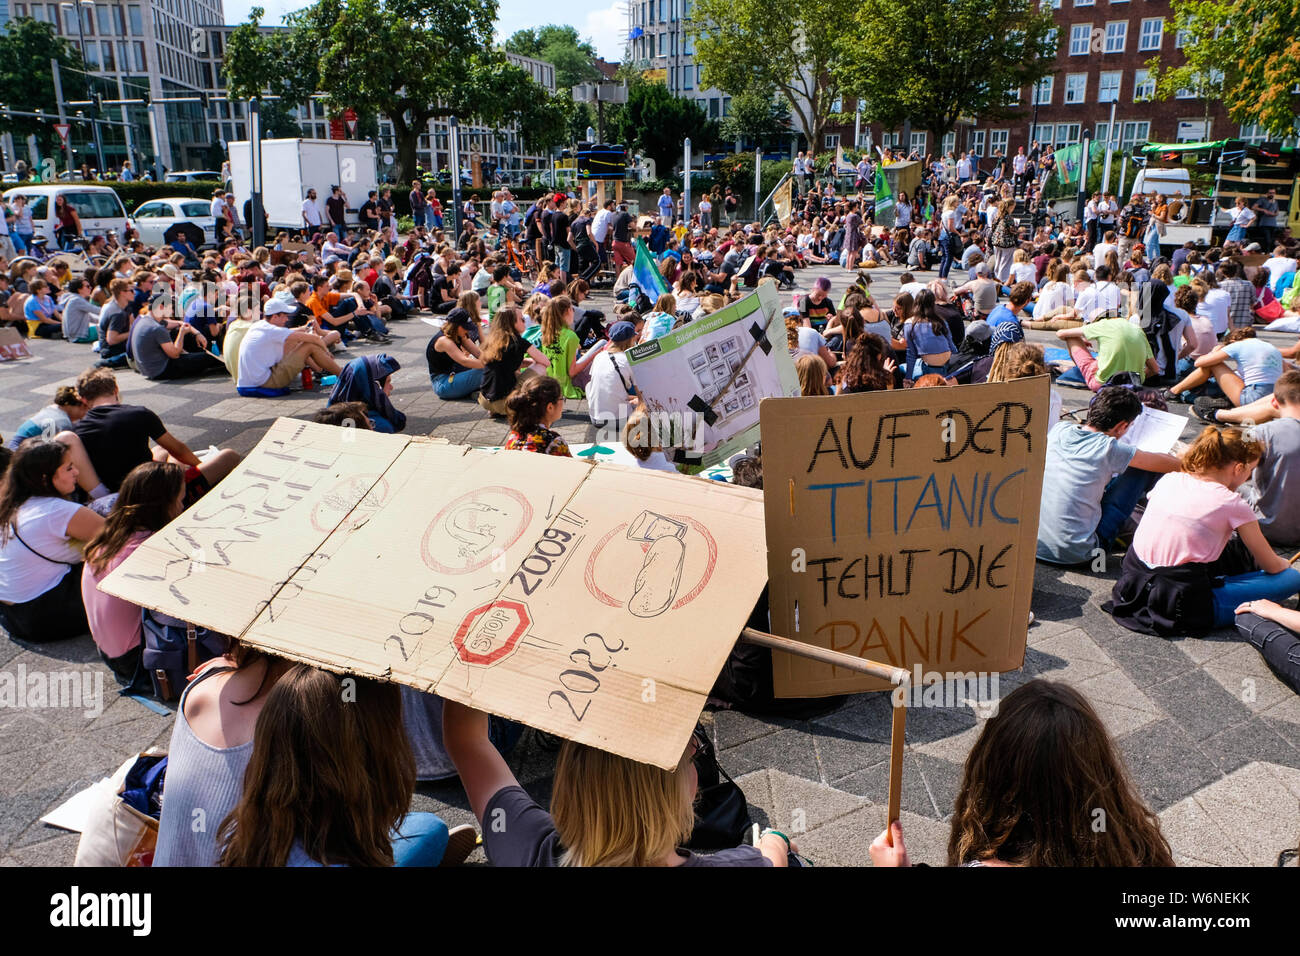 Dortmund, Germany, 01.08.2019: demonstration of the 'Fridays for Future' movement on the occasion of the first German summer congress of environmental activists through the city center of Dortmund Stock Photo